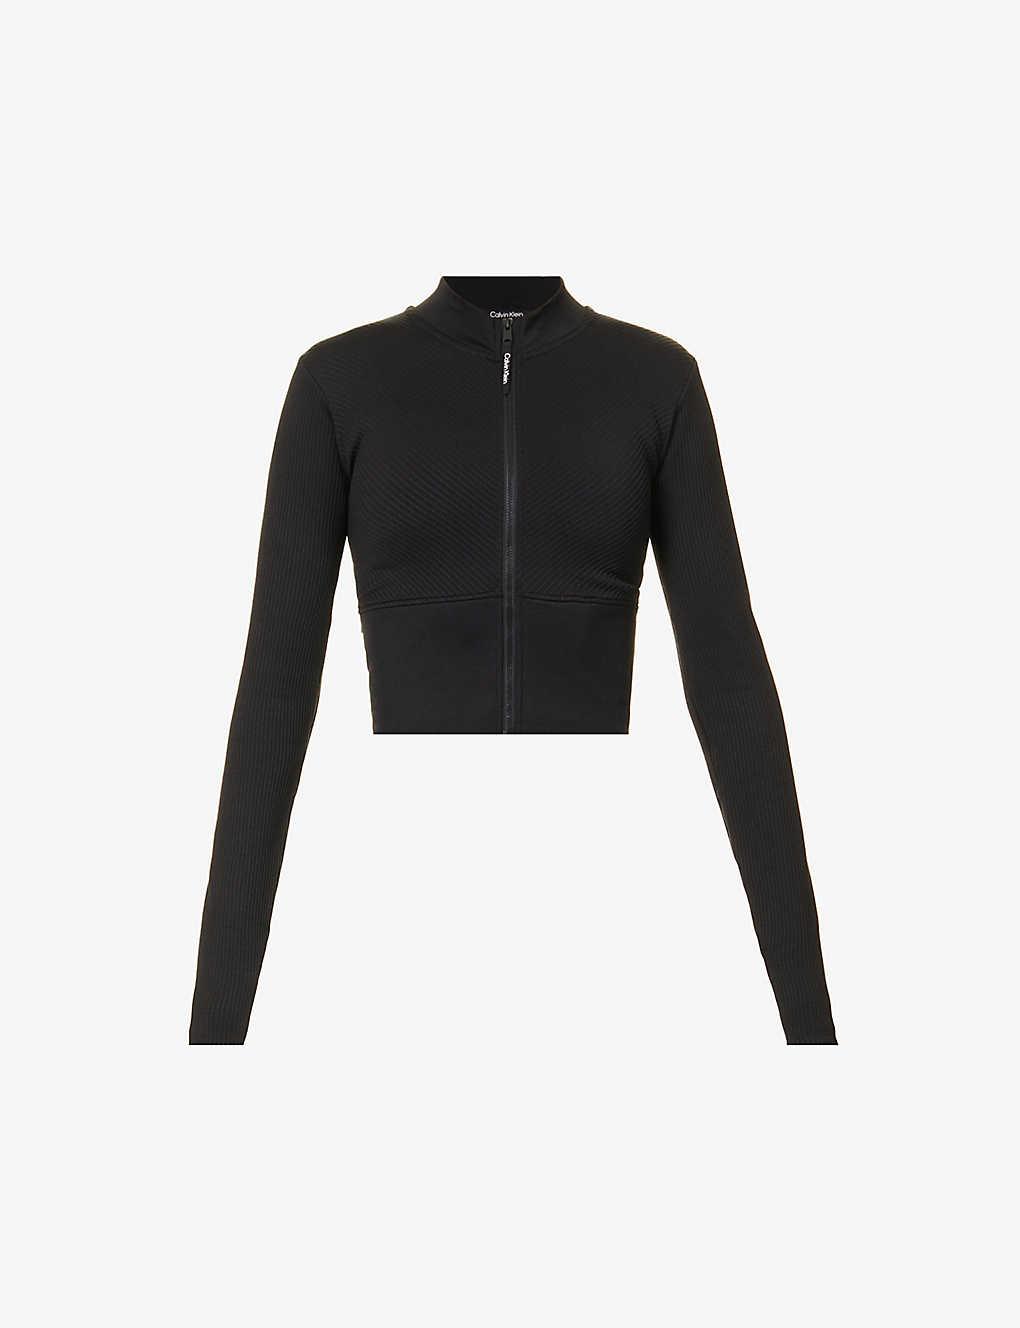 Calvin Klein Seamless Ribbed Stretch-woven Jacket in Black | Lyst